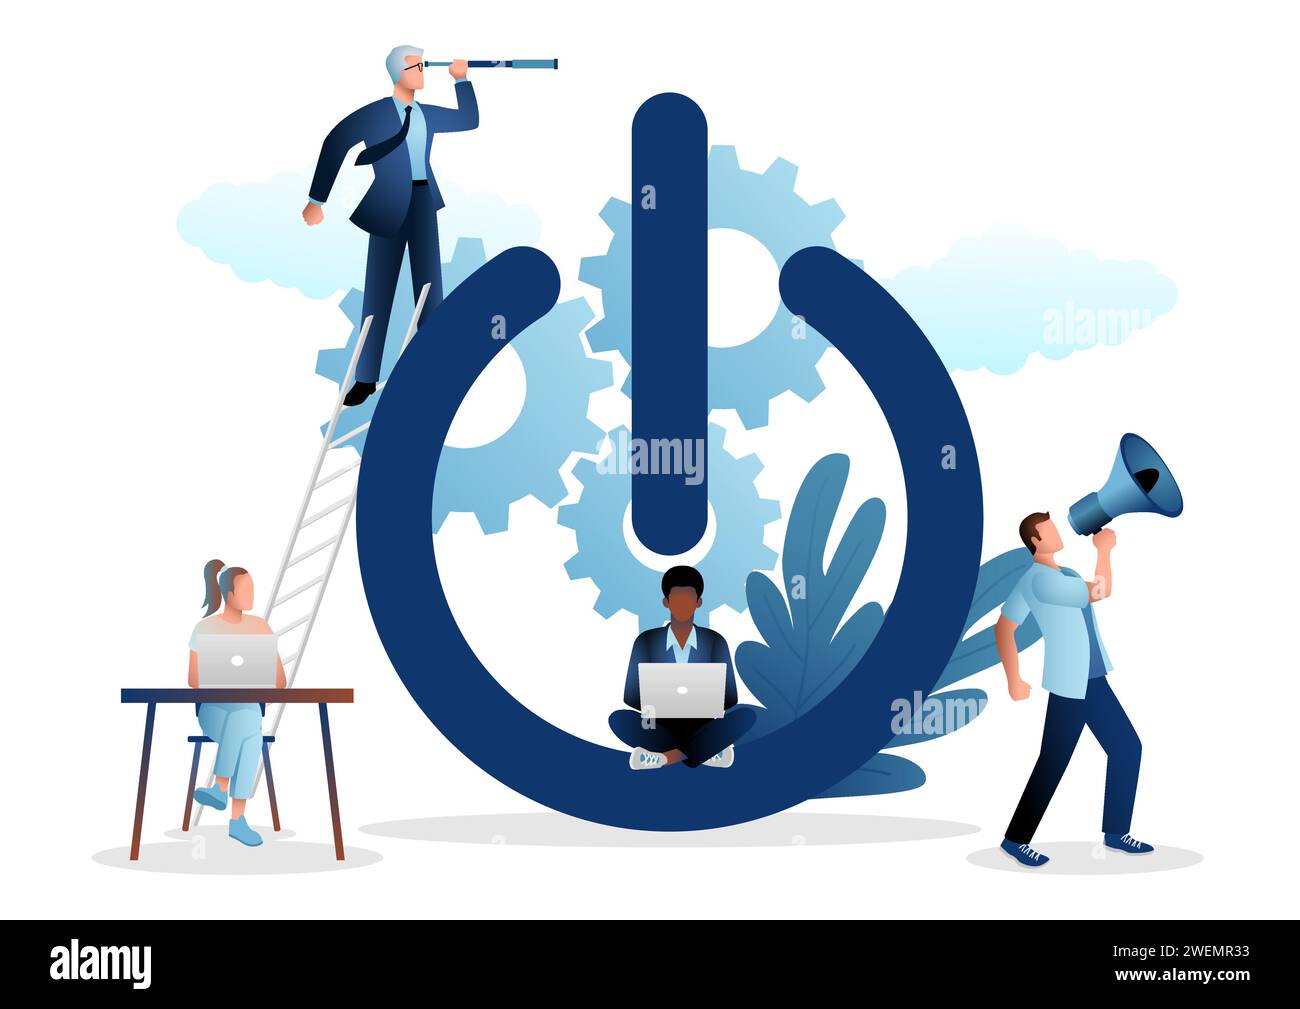 Vector illustration of casual business people carry out activities to improve performance at the giant on button symbol, start-up business concept Stock Vector